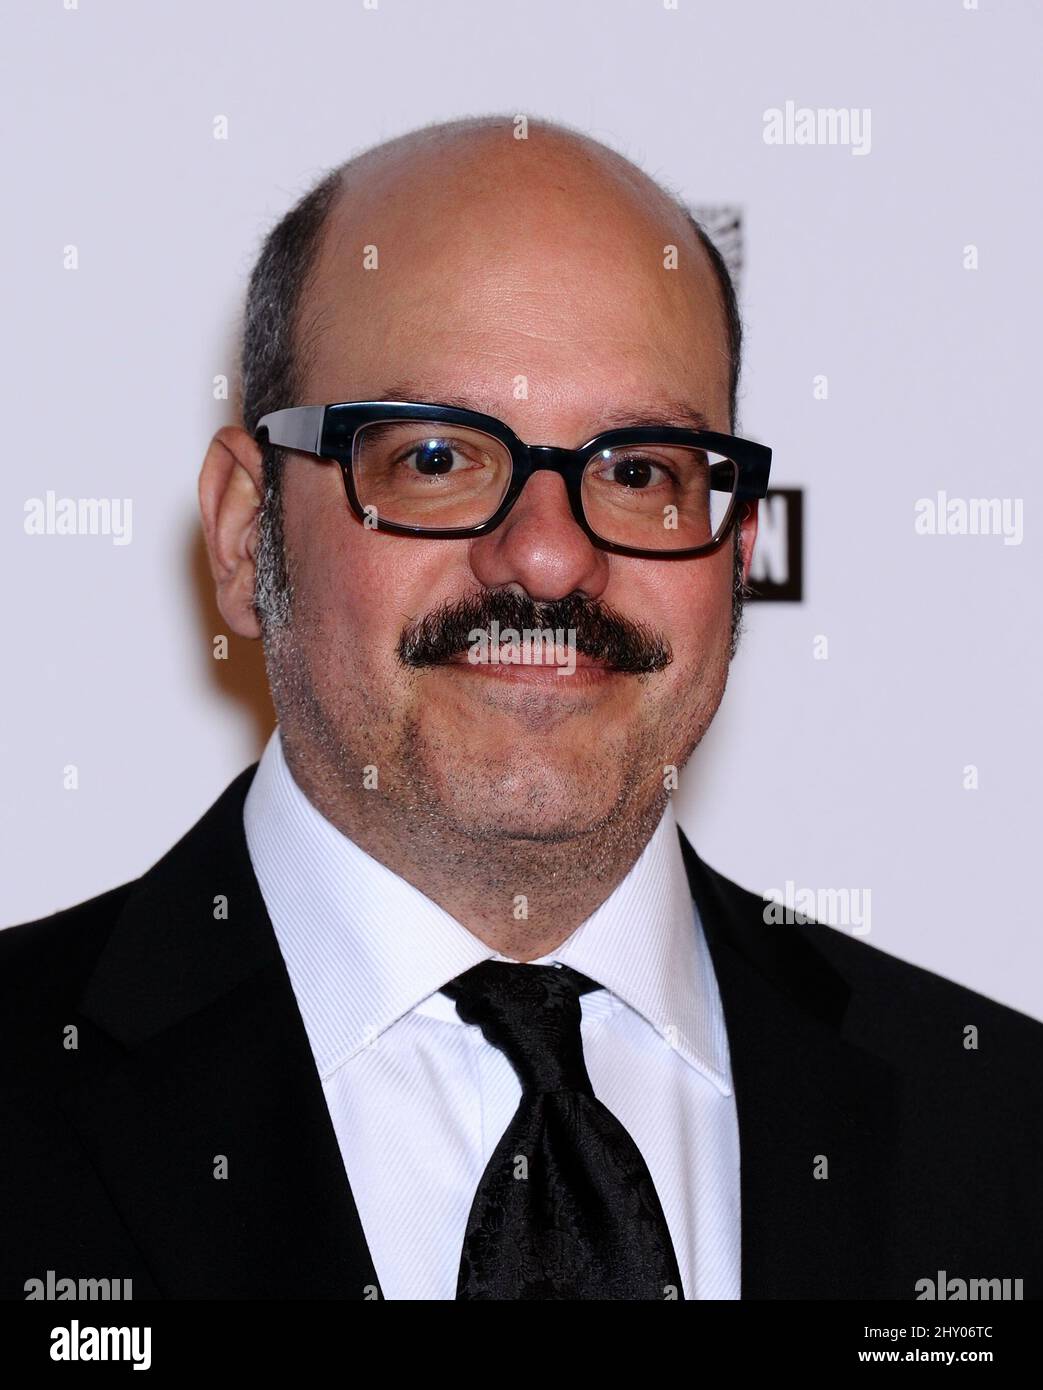 David Cross attends the American Cinematheque Honours Ben Stiller at Hilton Hotel, Beverly Hills, California on November 15, 2012. Stock Photo